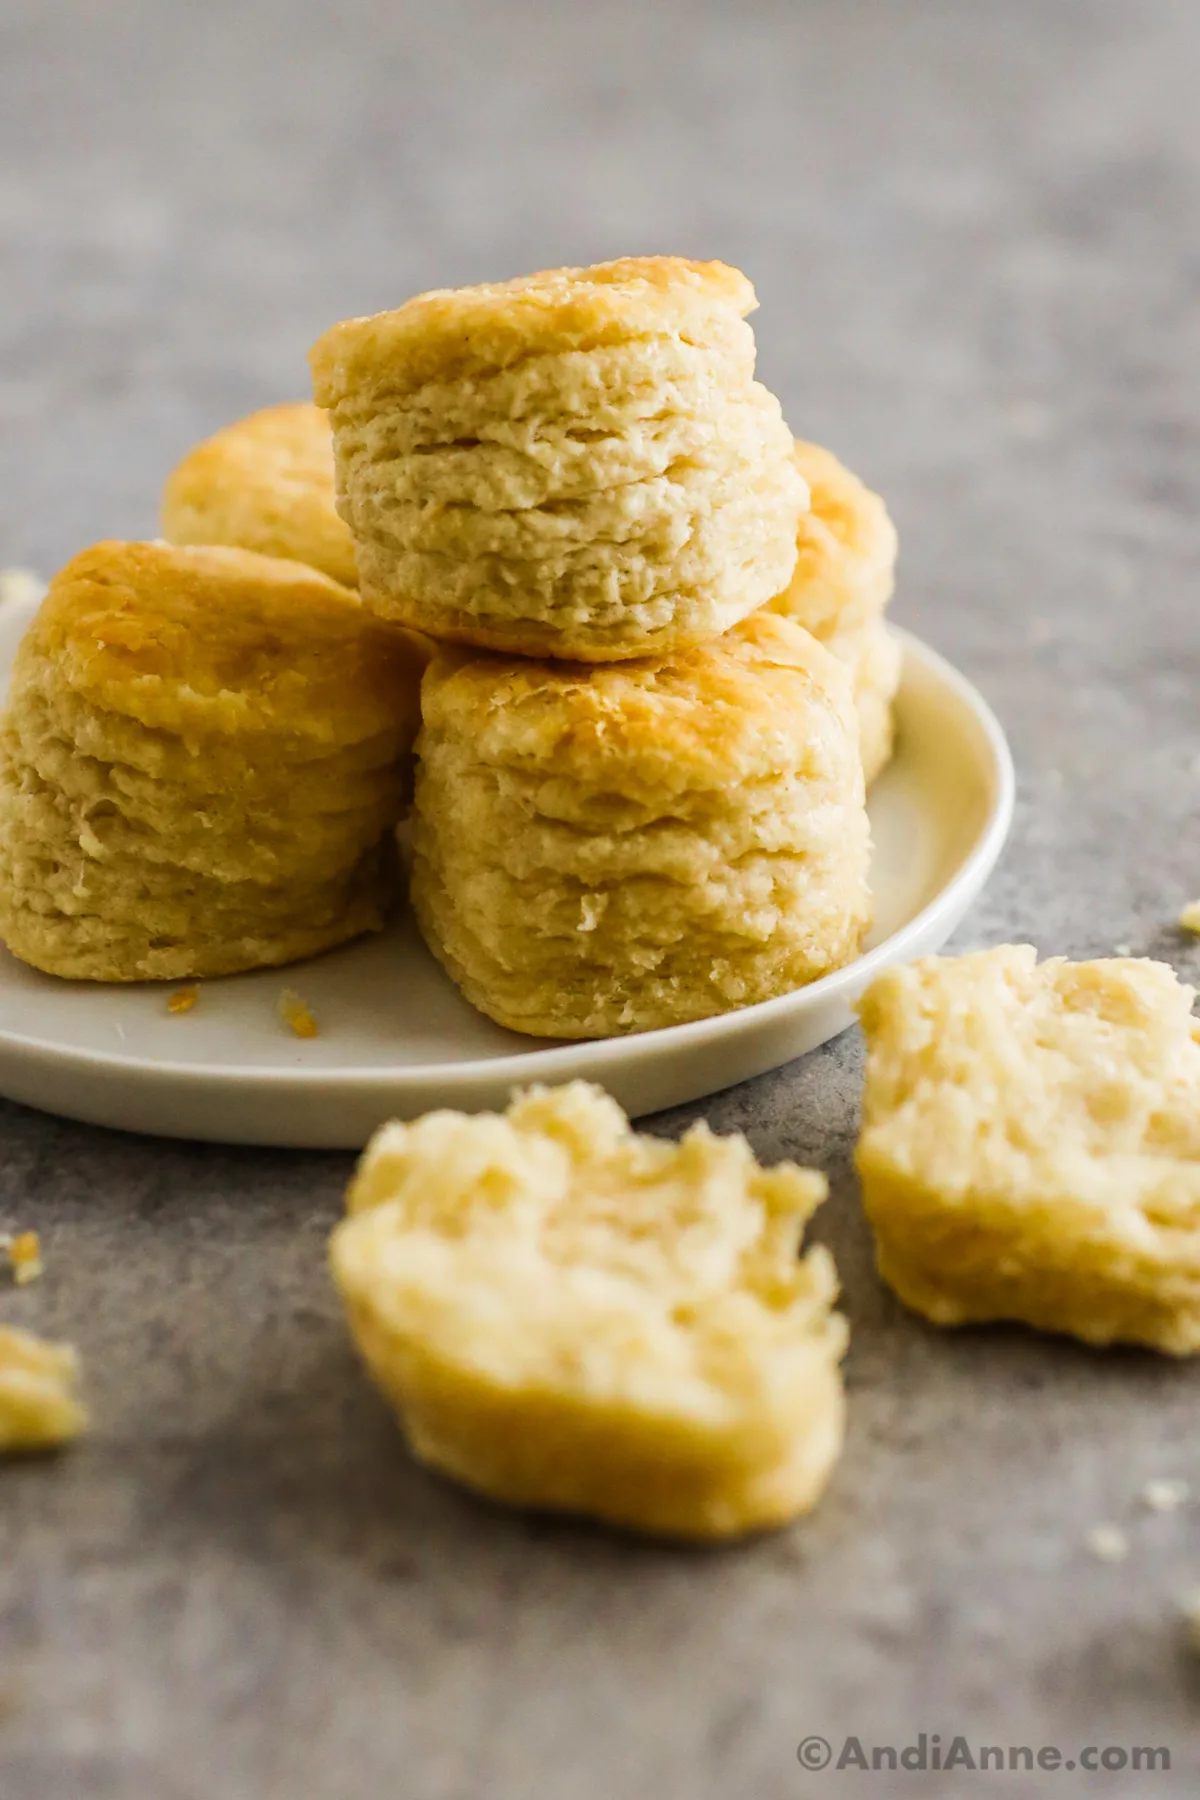 A few biscuits on a plate with one in the front.